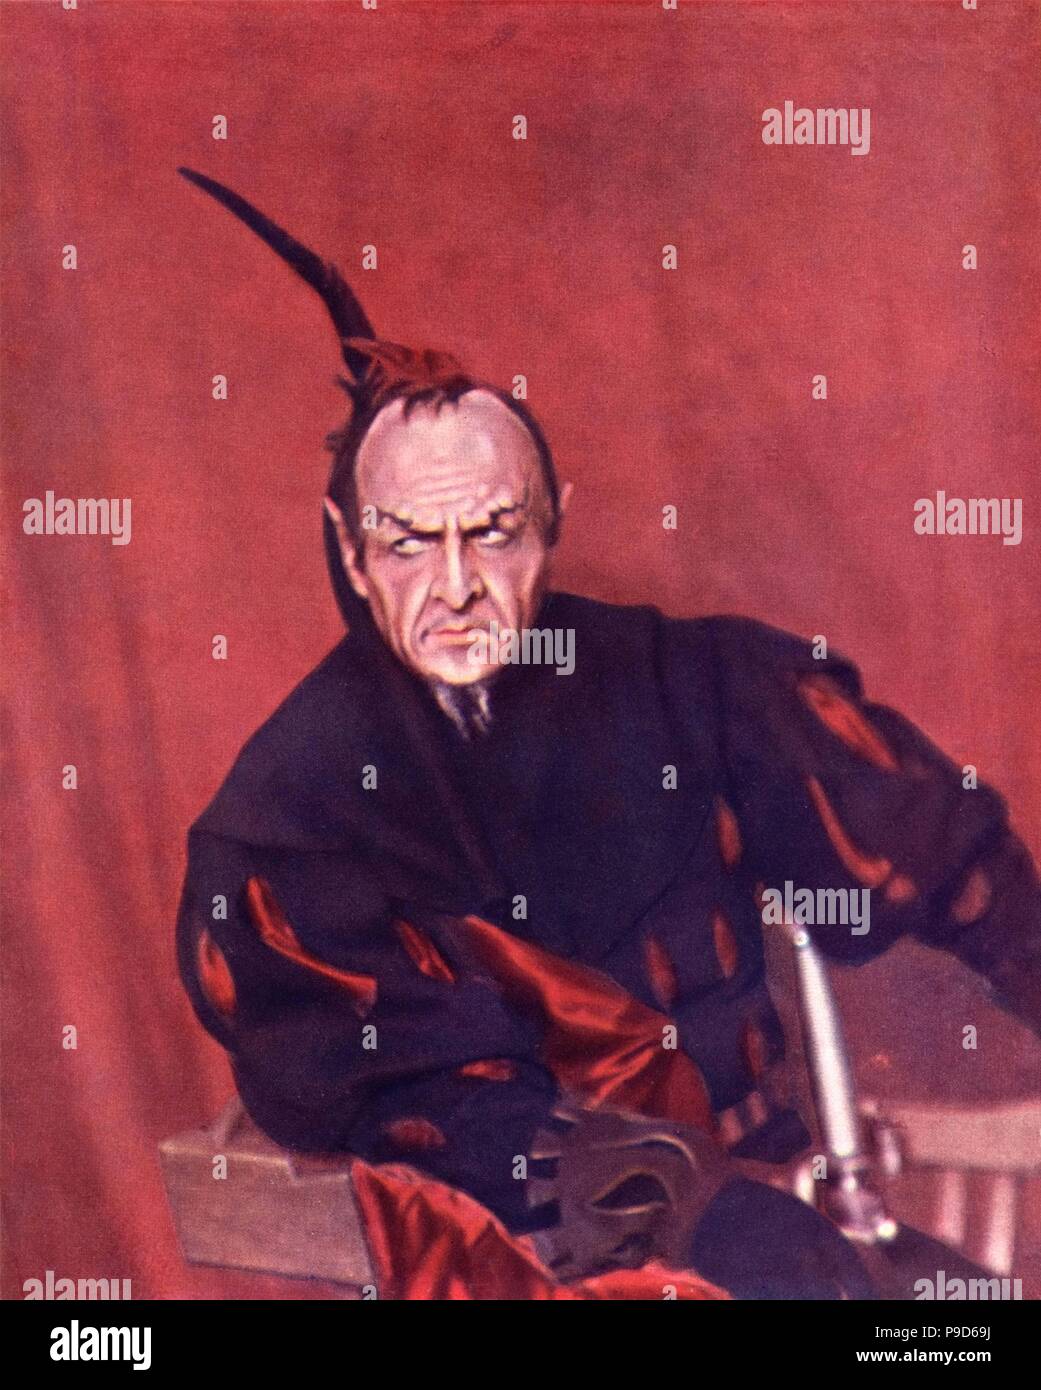 Feodor Chaliapin as Mephistopheles in the opera Faust by Charles Gounod. Museum: PRIVATE COLLECTION. Stock Photo